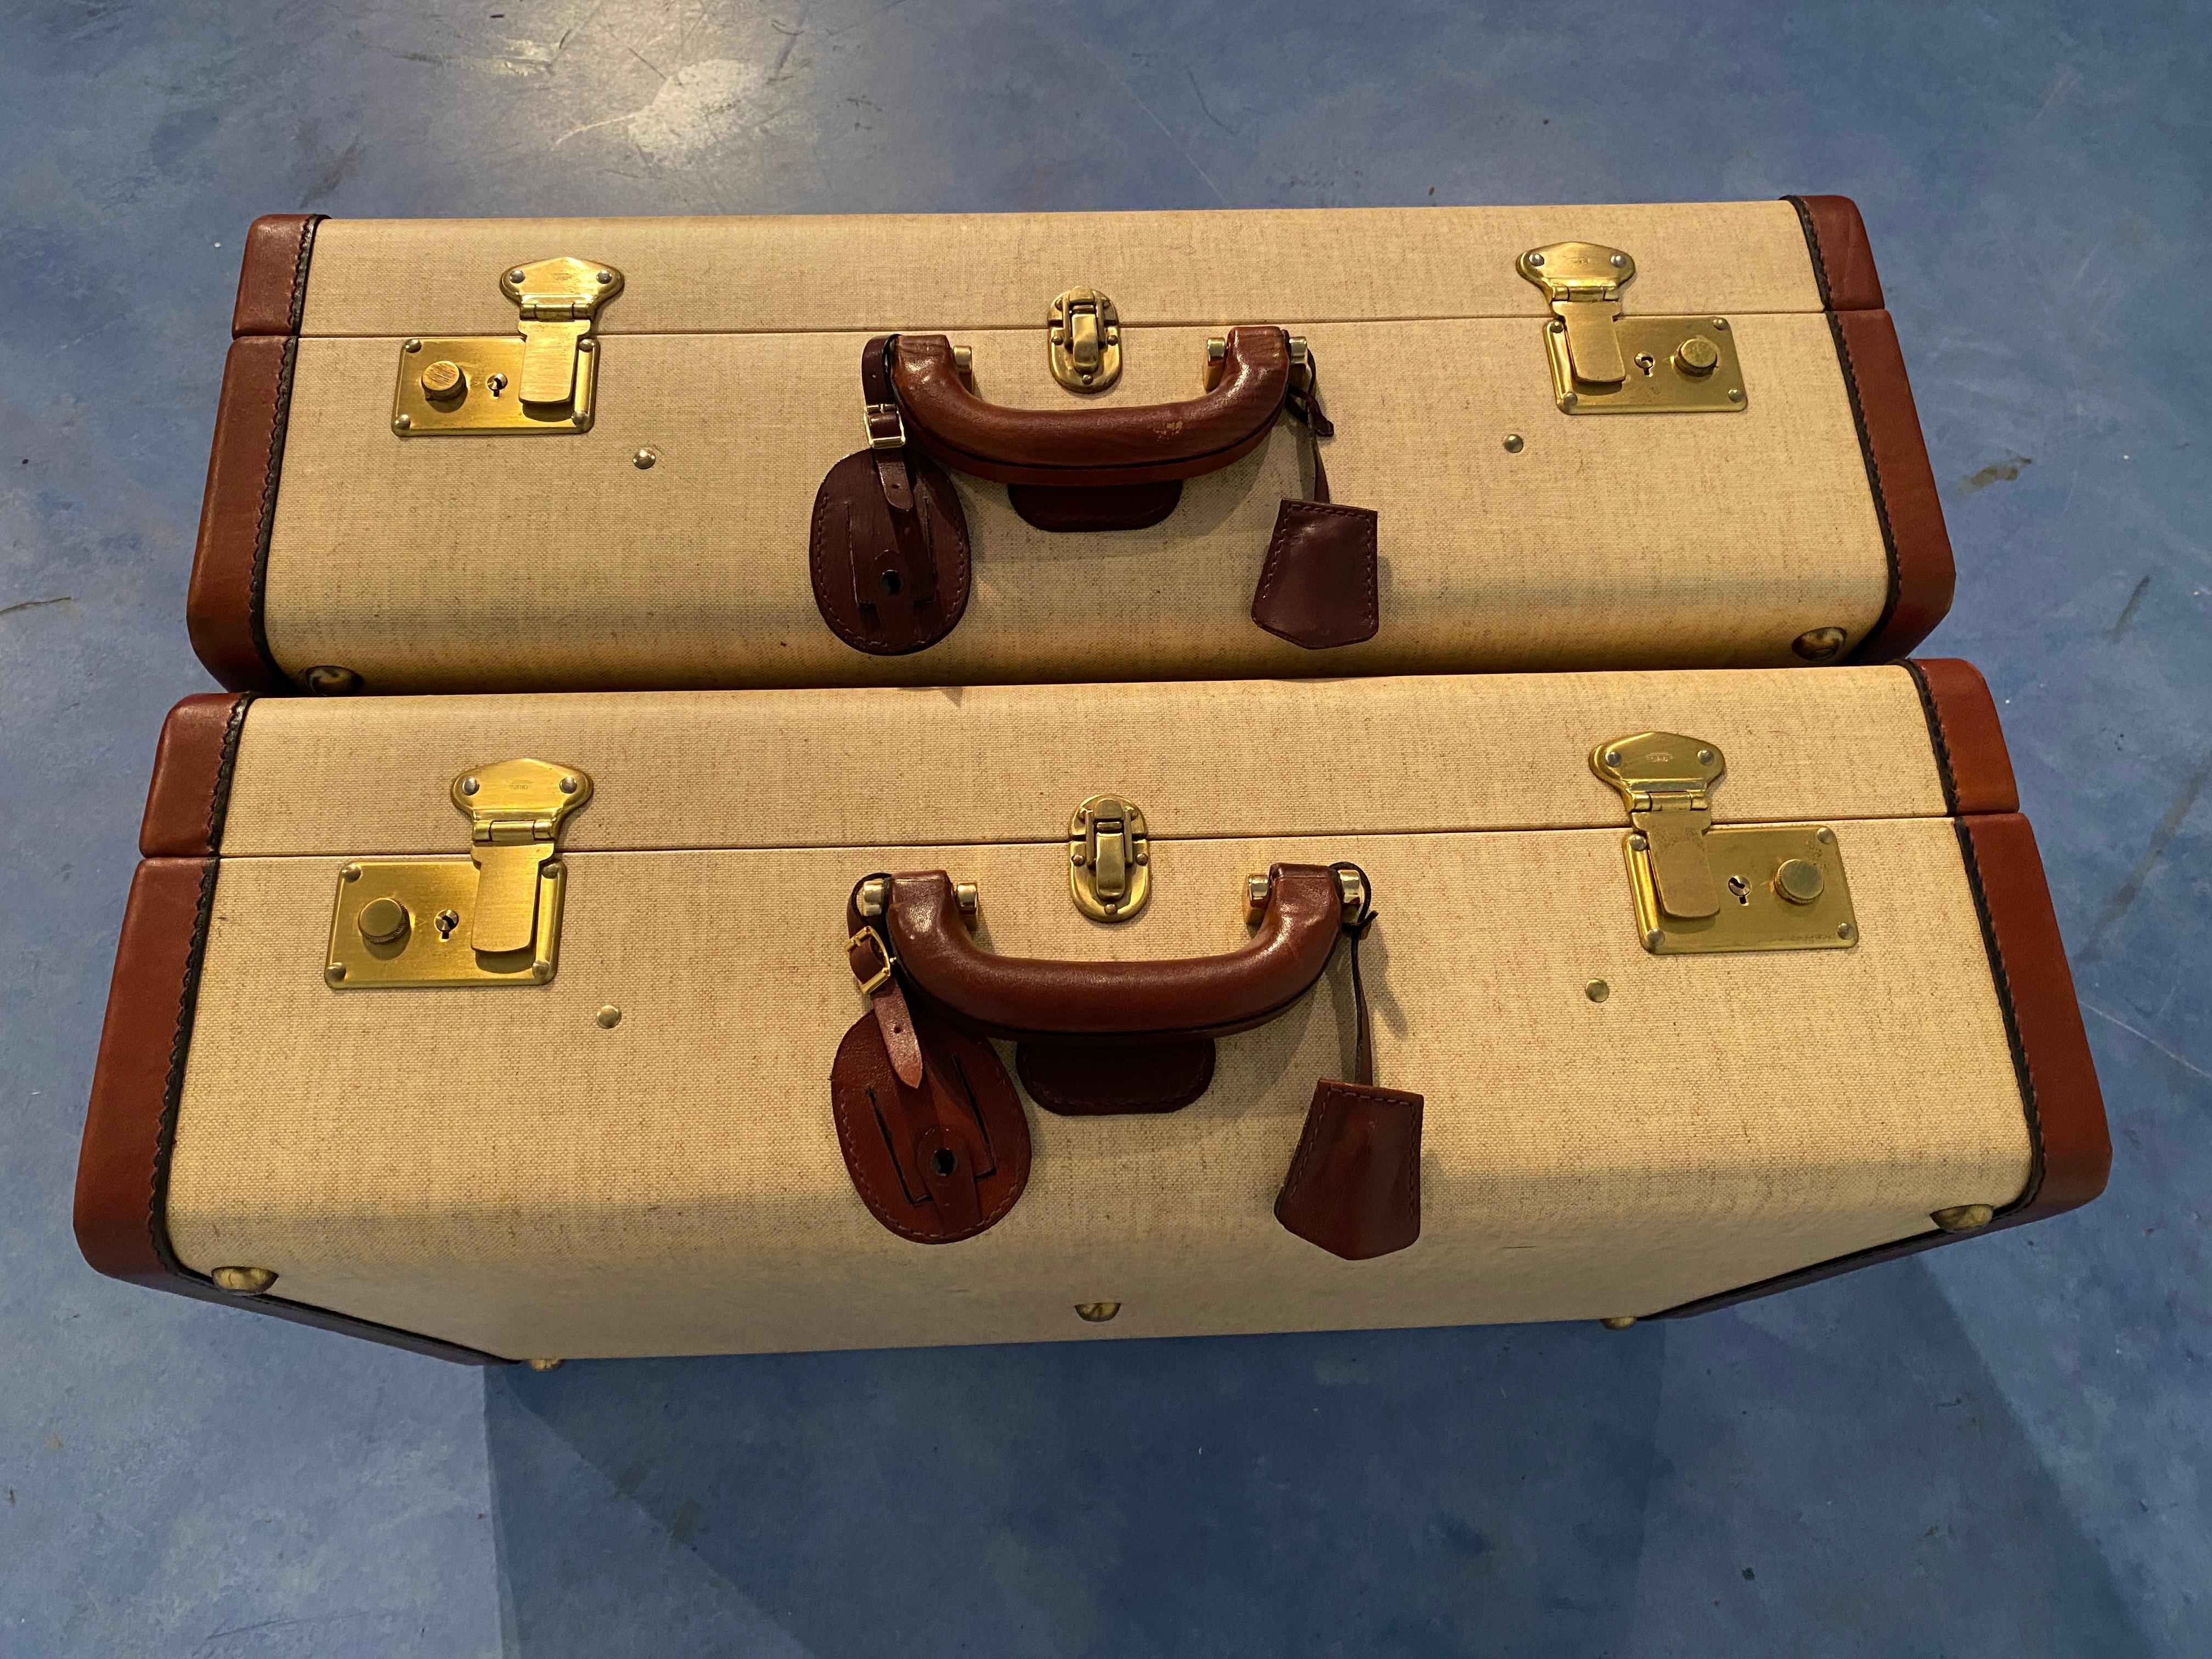 Italian Mid-Century Moder Luggages or Suitcases Mèlange Color, Set of Two, 1960 For Sale 11